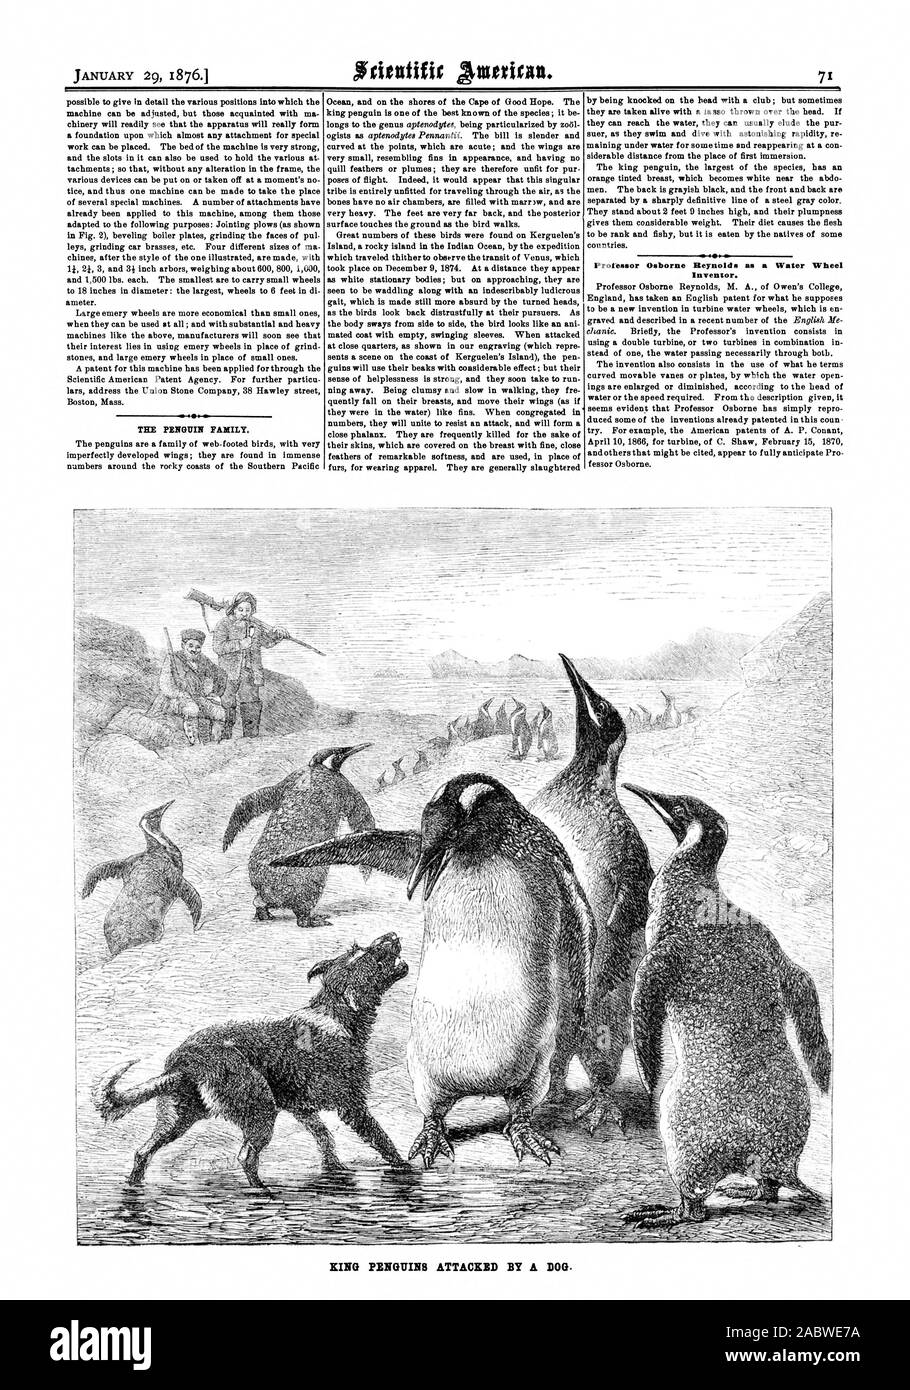 Professor Osborne Reynolds as a Water Wheel Inventor. KING PENGUINS ATTACKED BY A DOG., scientific american, 1876-01-29 Stock Photo